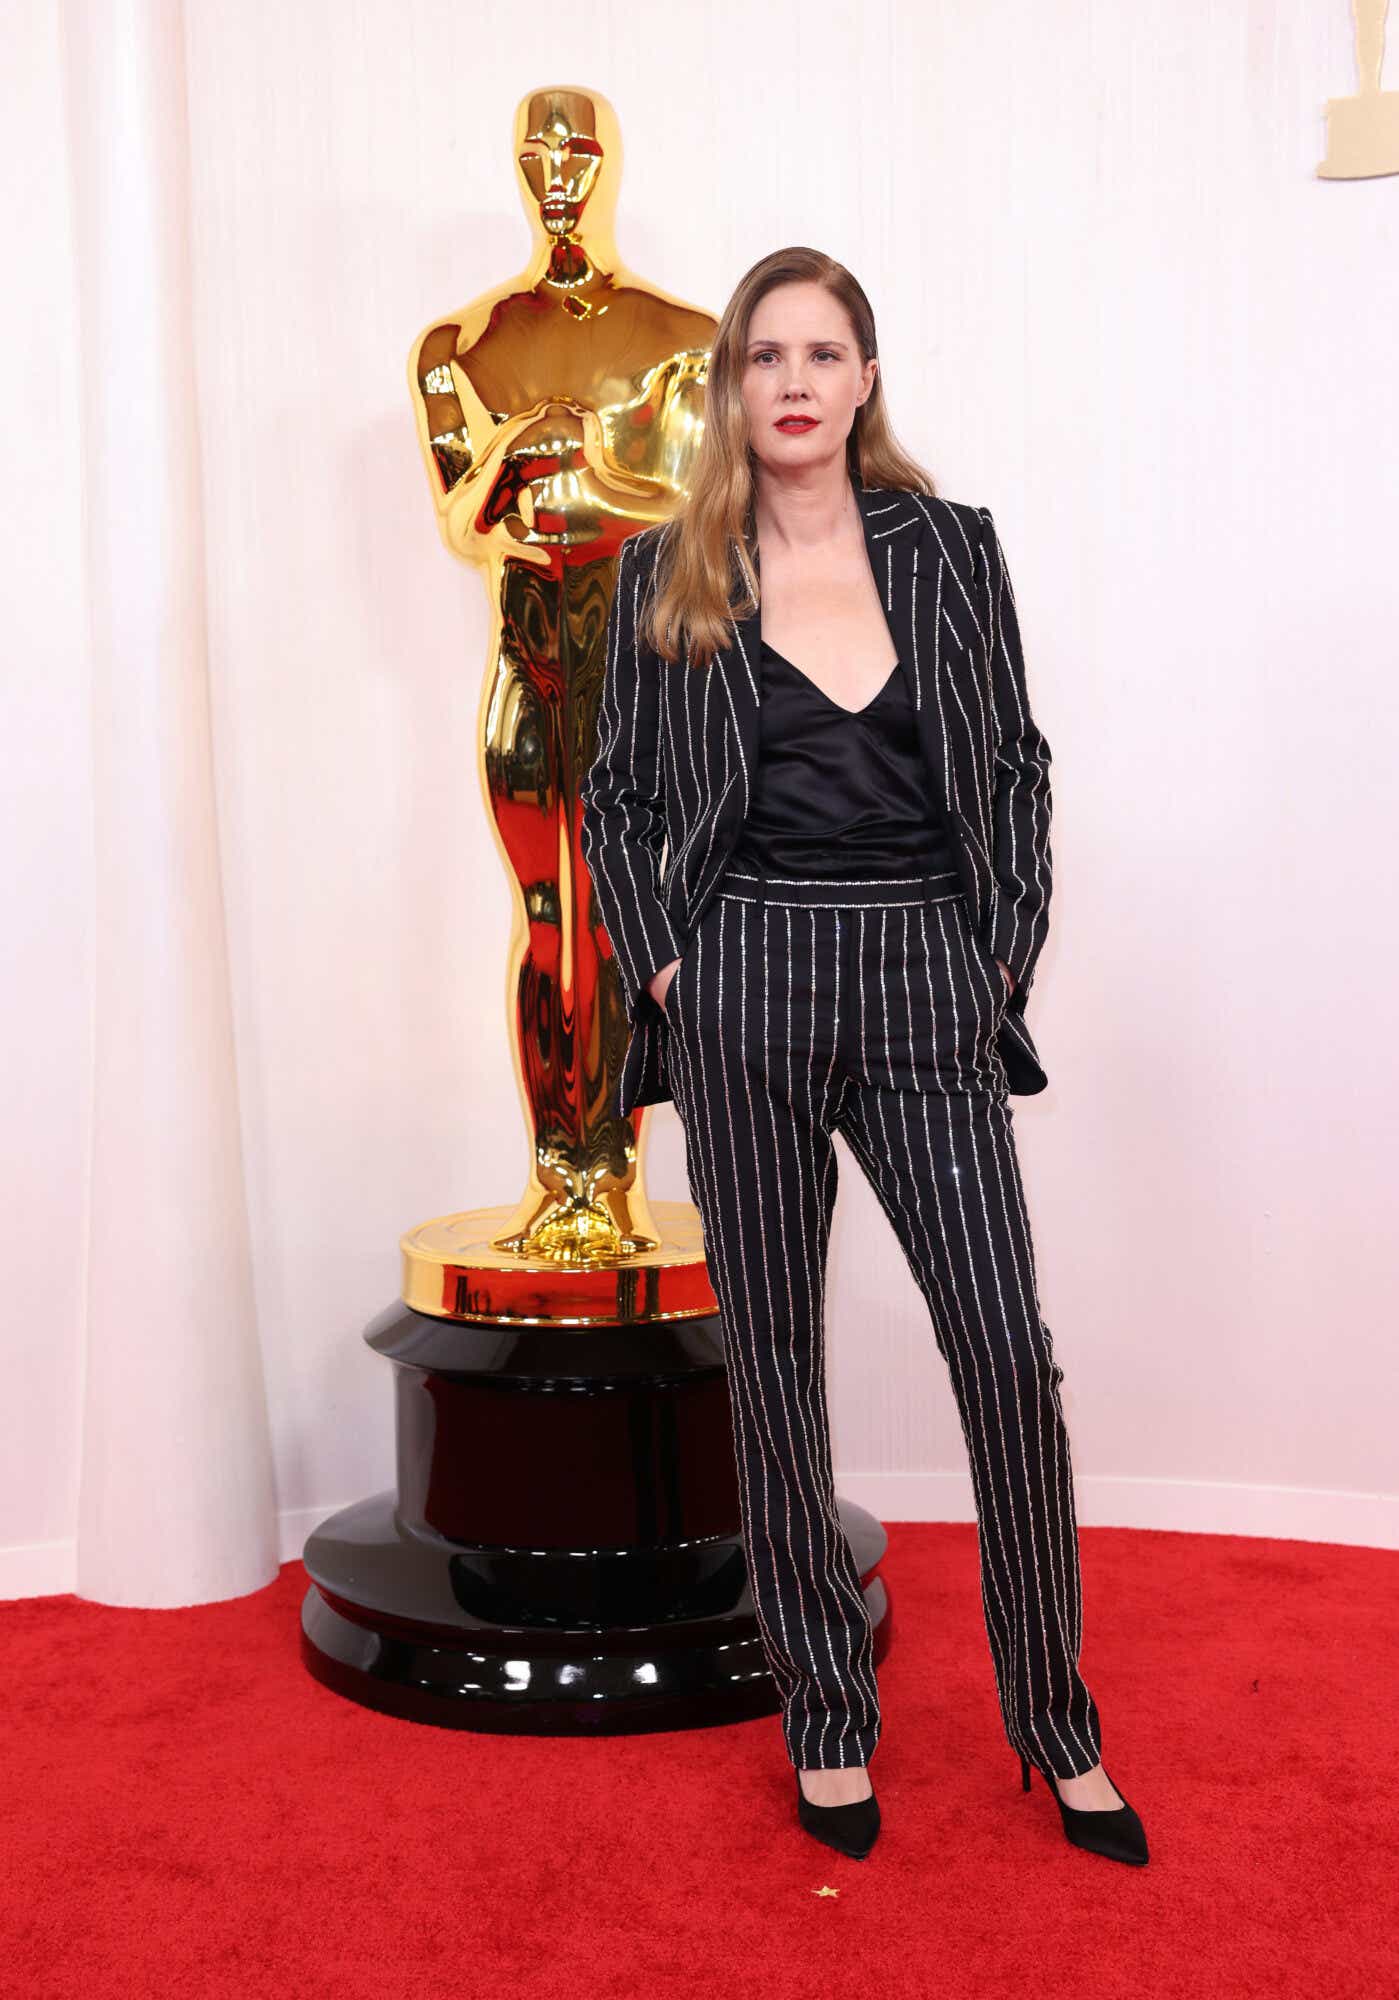 Justine Triet wears a black suit bejeweled in a pinstripe pattern to the Oscars and a black silky top.